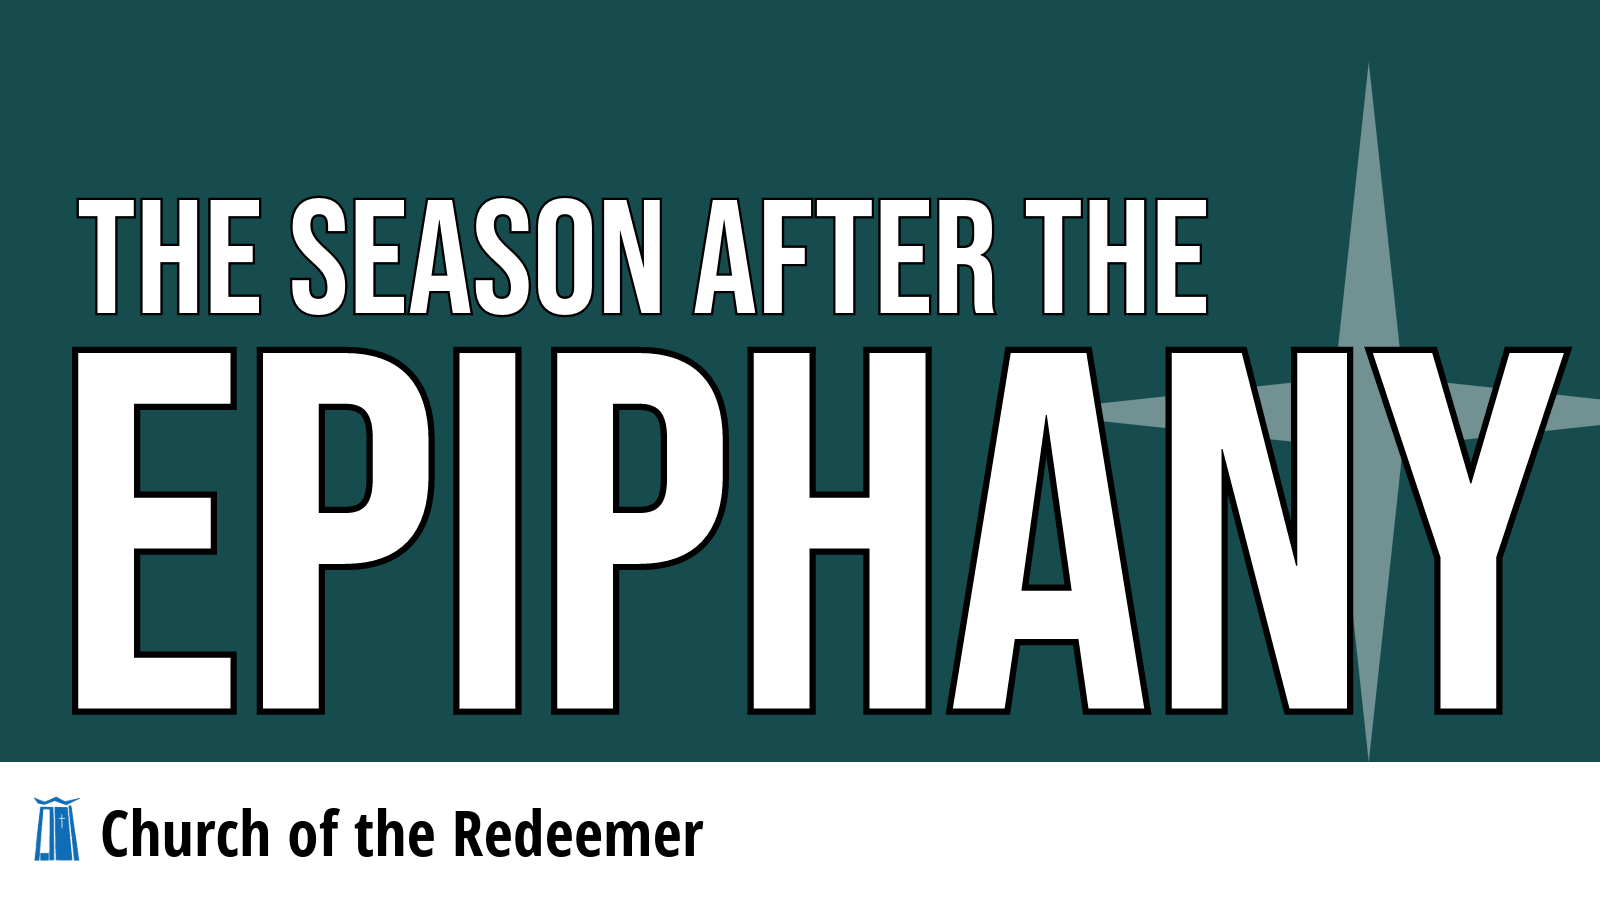 The Season after the Epiphany